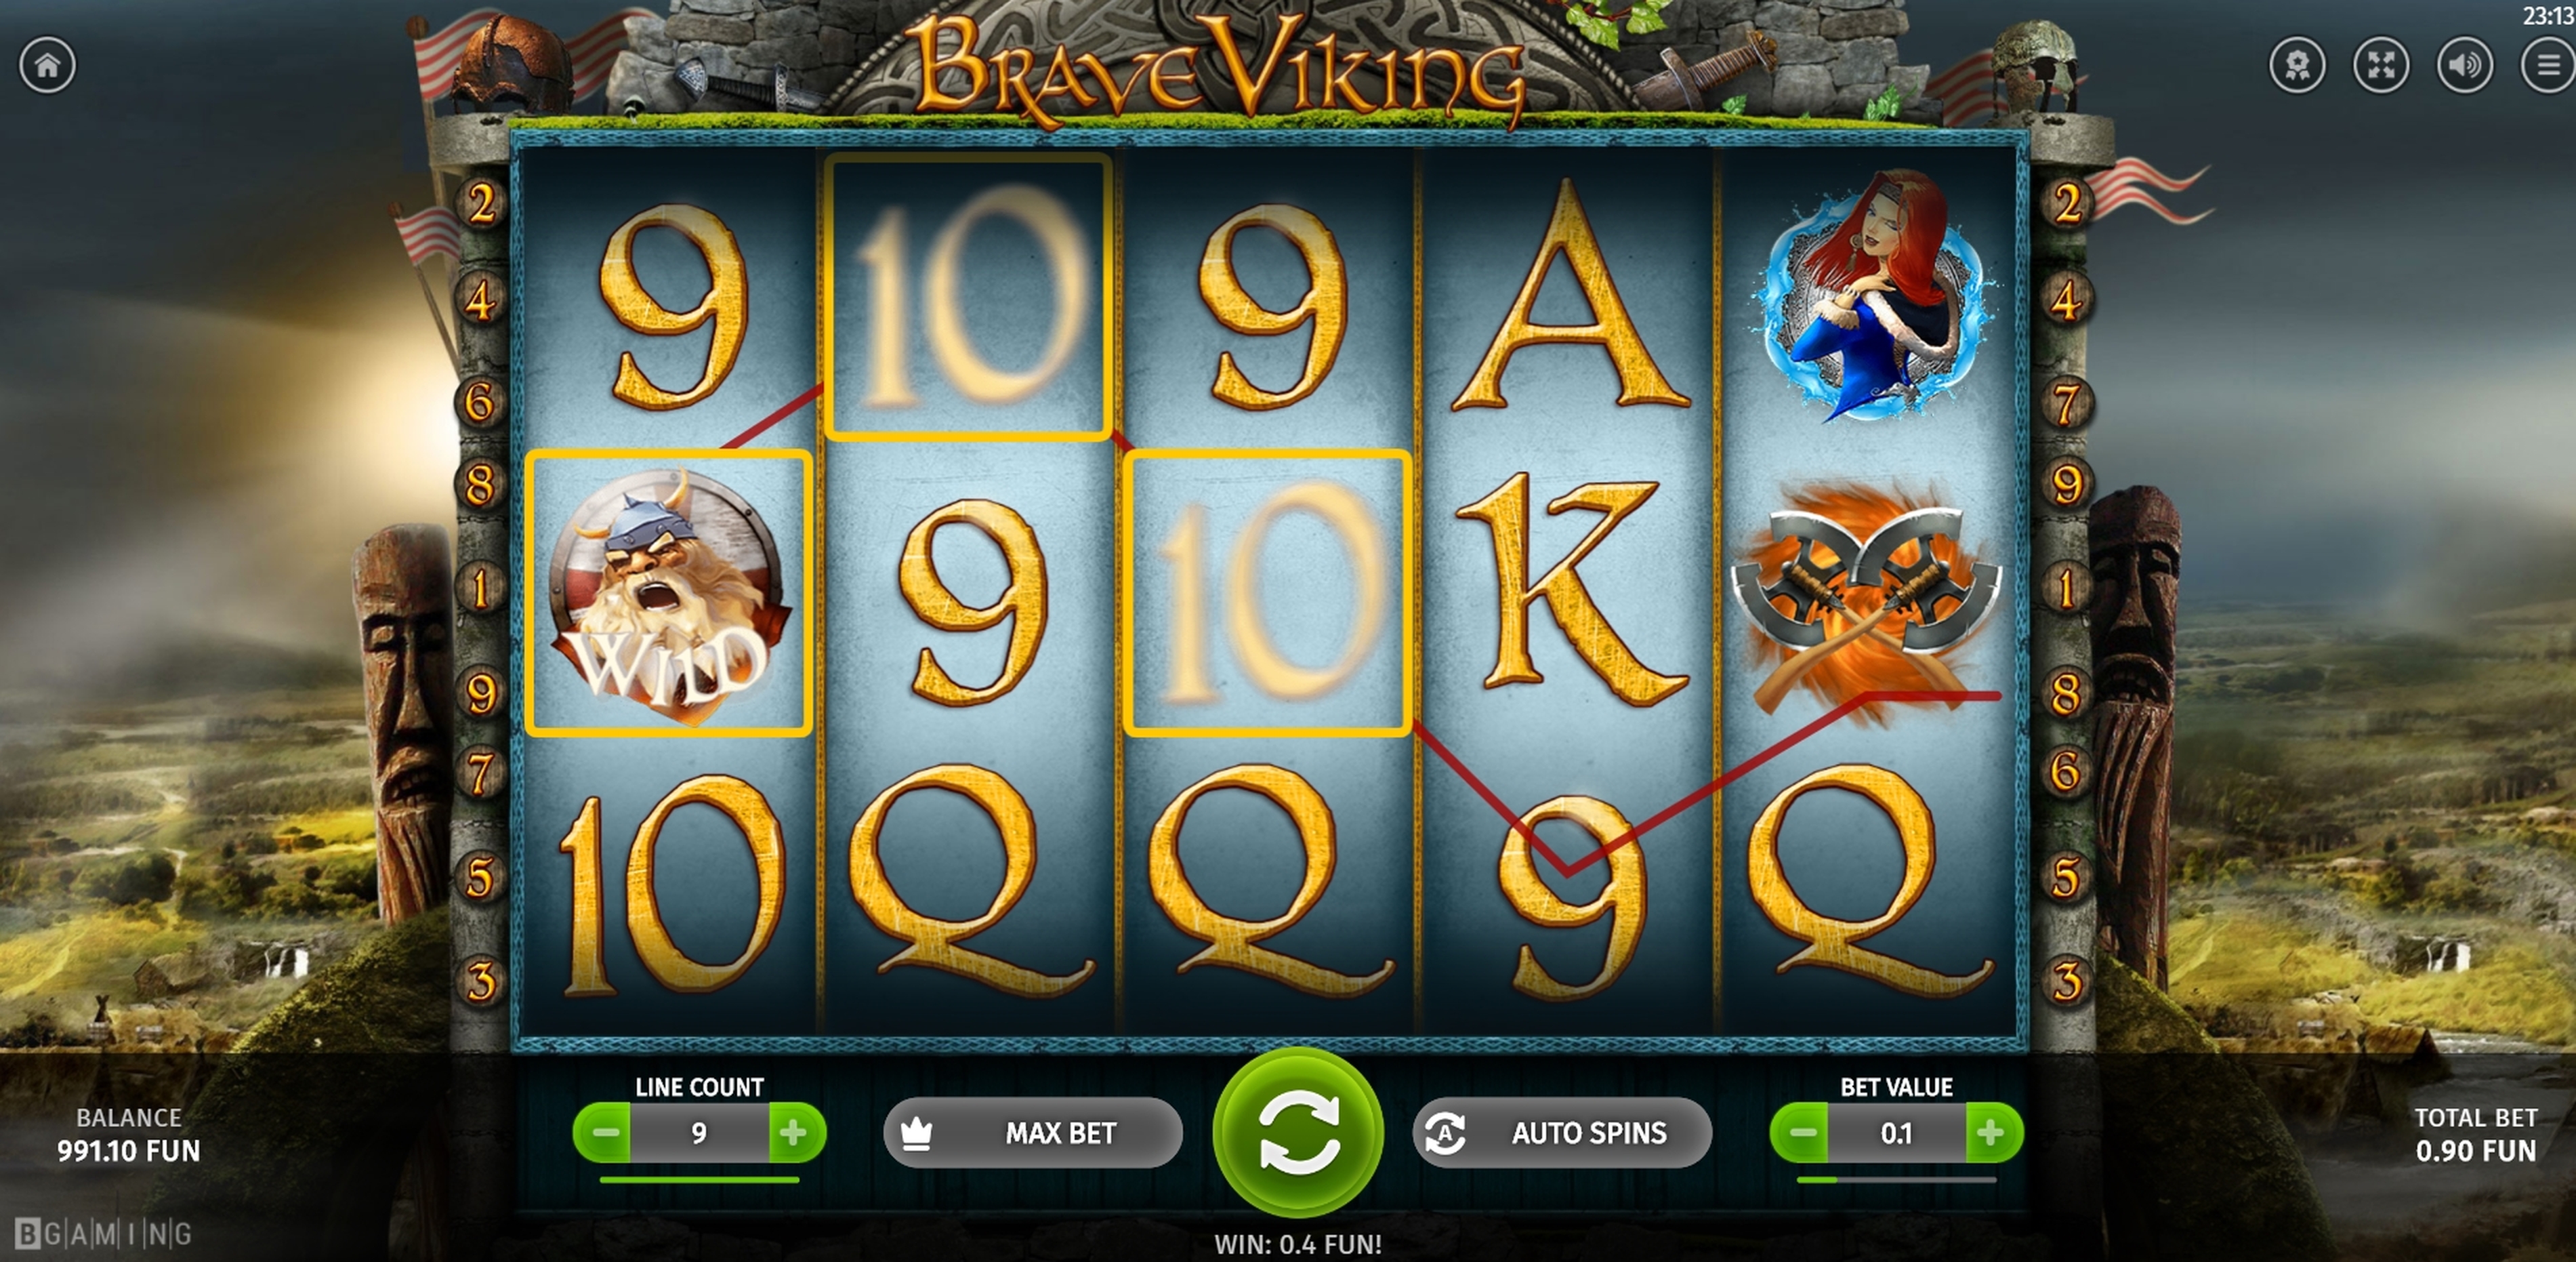 Win Money in Brave Viking Free Slot Game by BGAMING